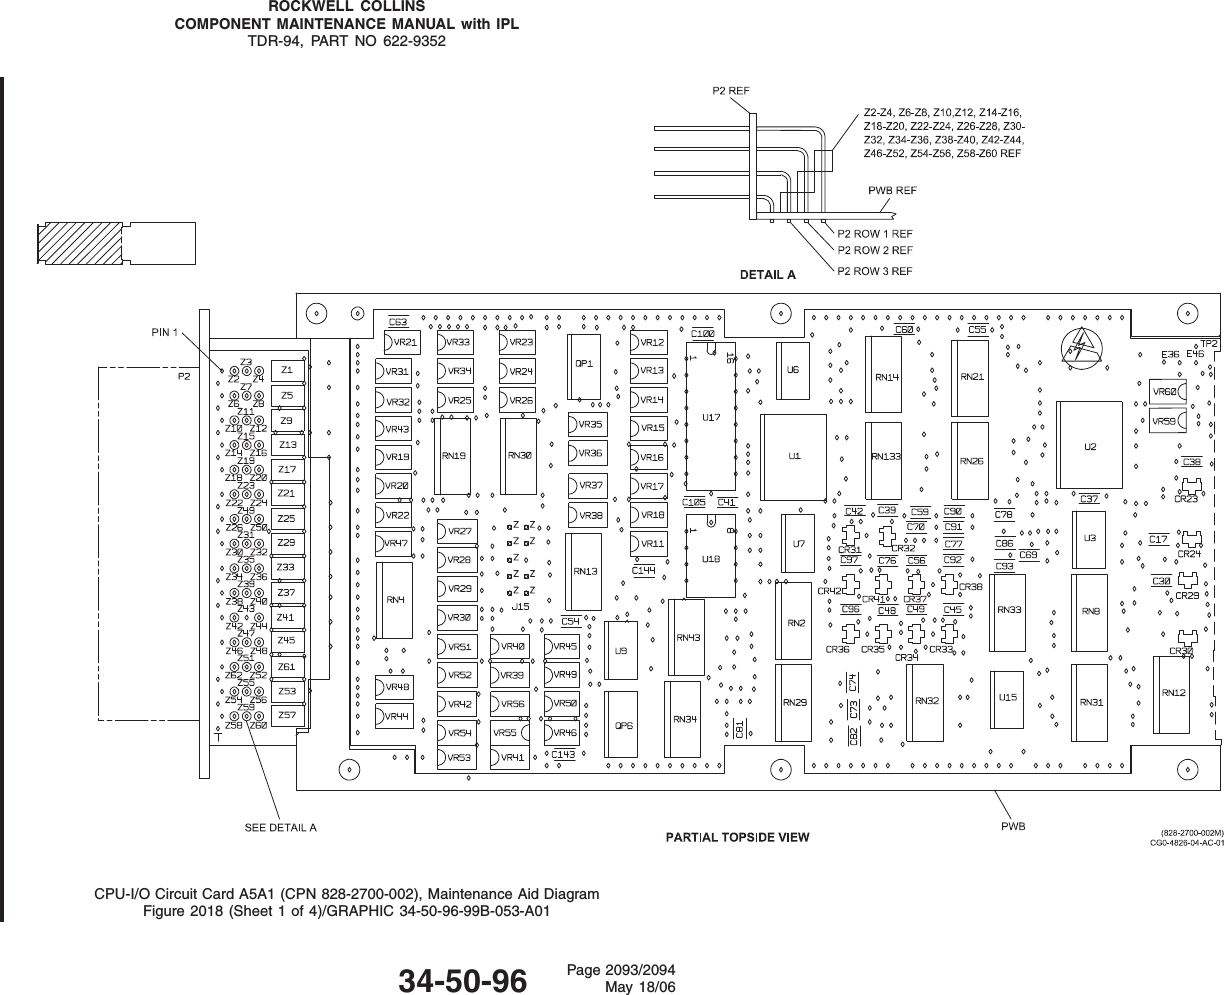 ROCKWELL COLLINSCOMPONENT MAINTENANCE MANUAL with IPLTDR-94, PART NO 622-9352CPU-I/O Circuit Card A5A1 (CPN 828-2700-002), Maintenance Aid DiagramFigure 2018 (Sheet 1 of 4)/GRAPHIC 34-50-96-99B-053-A0134-50-96 Page 2093/2094May 18/06